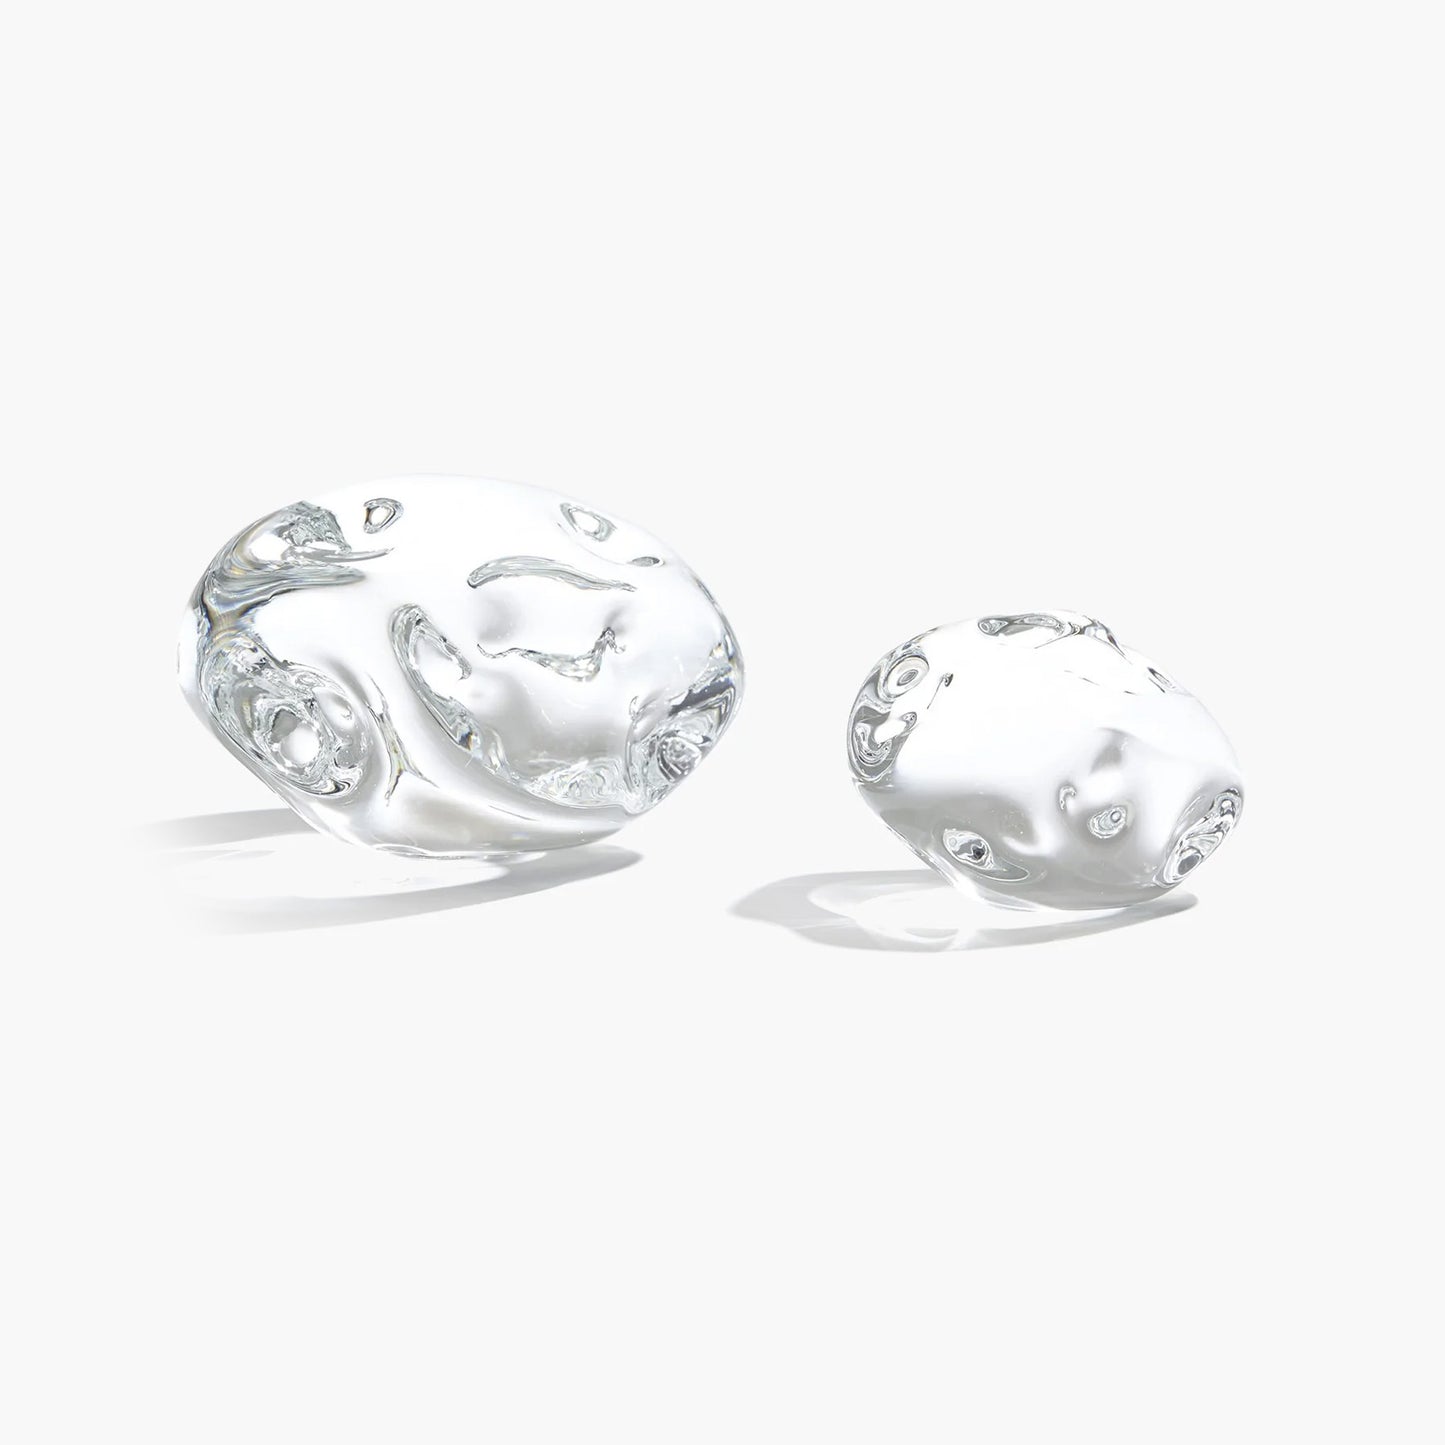 Dimple Paperweight-Clear